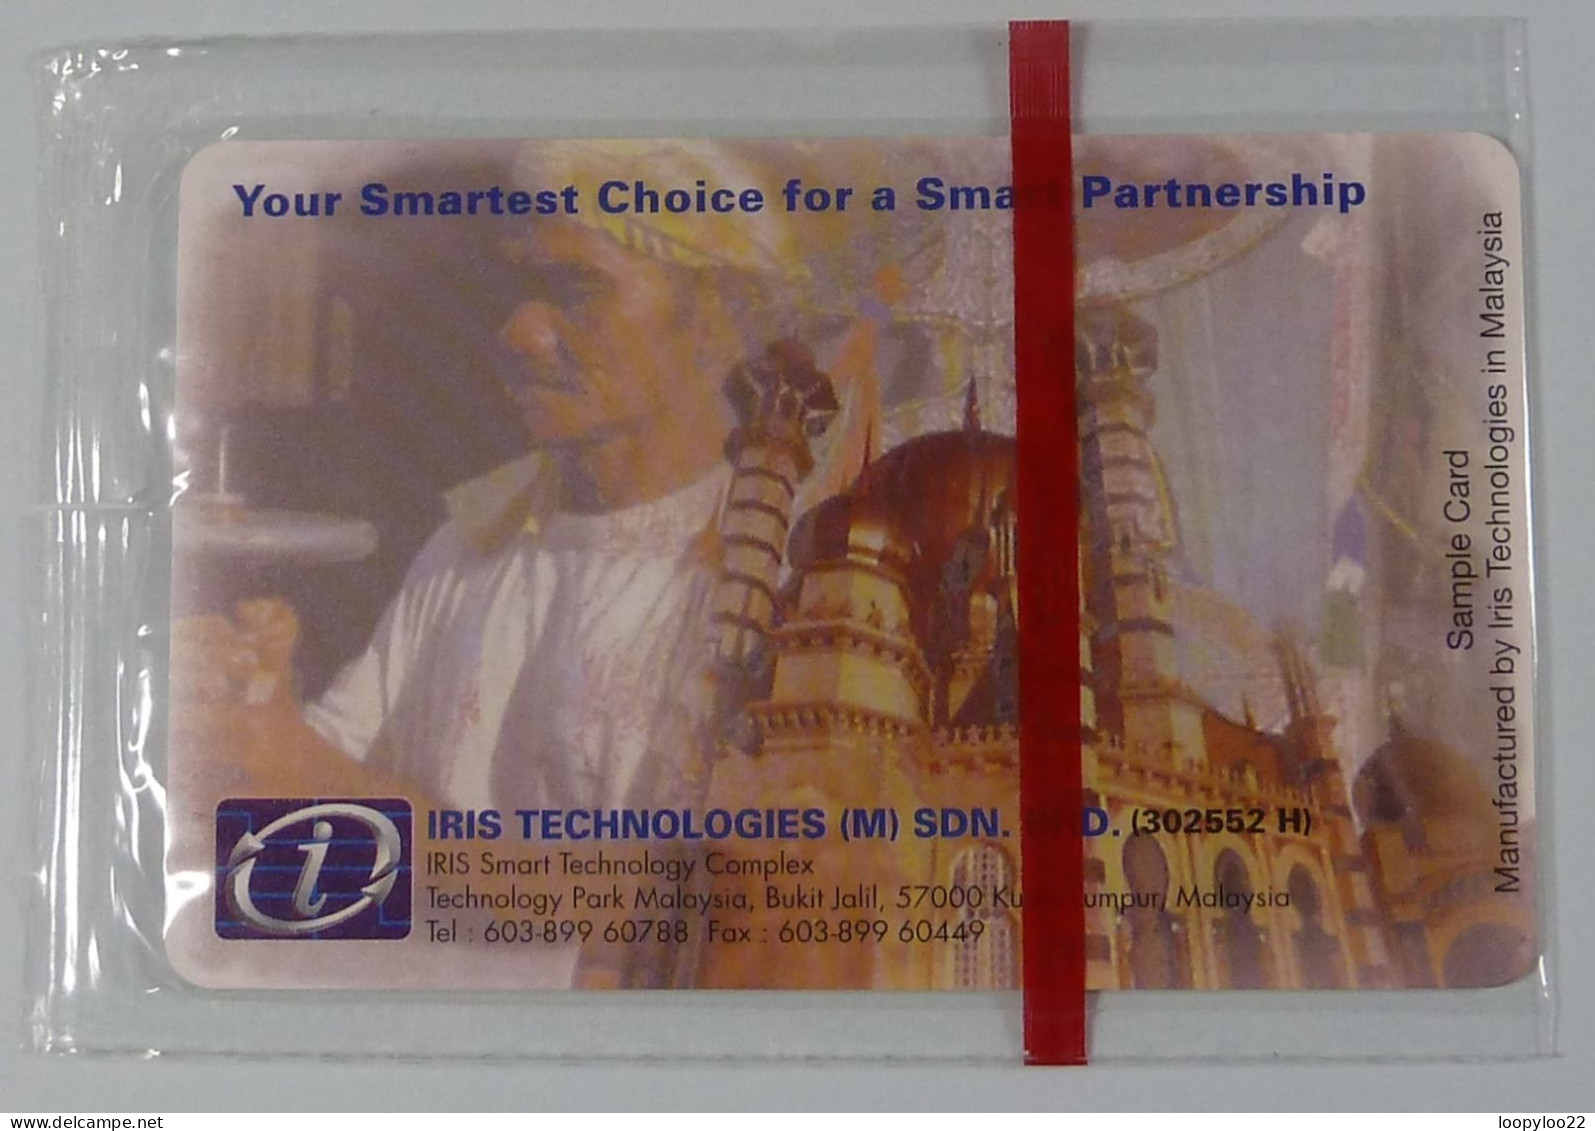 MALAYSIA - Pre Production Packaging Test - Iris Technologies - Smart Card - Blister - RARE - Malesia